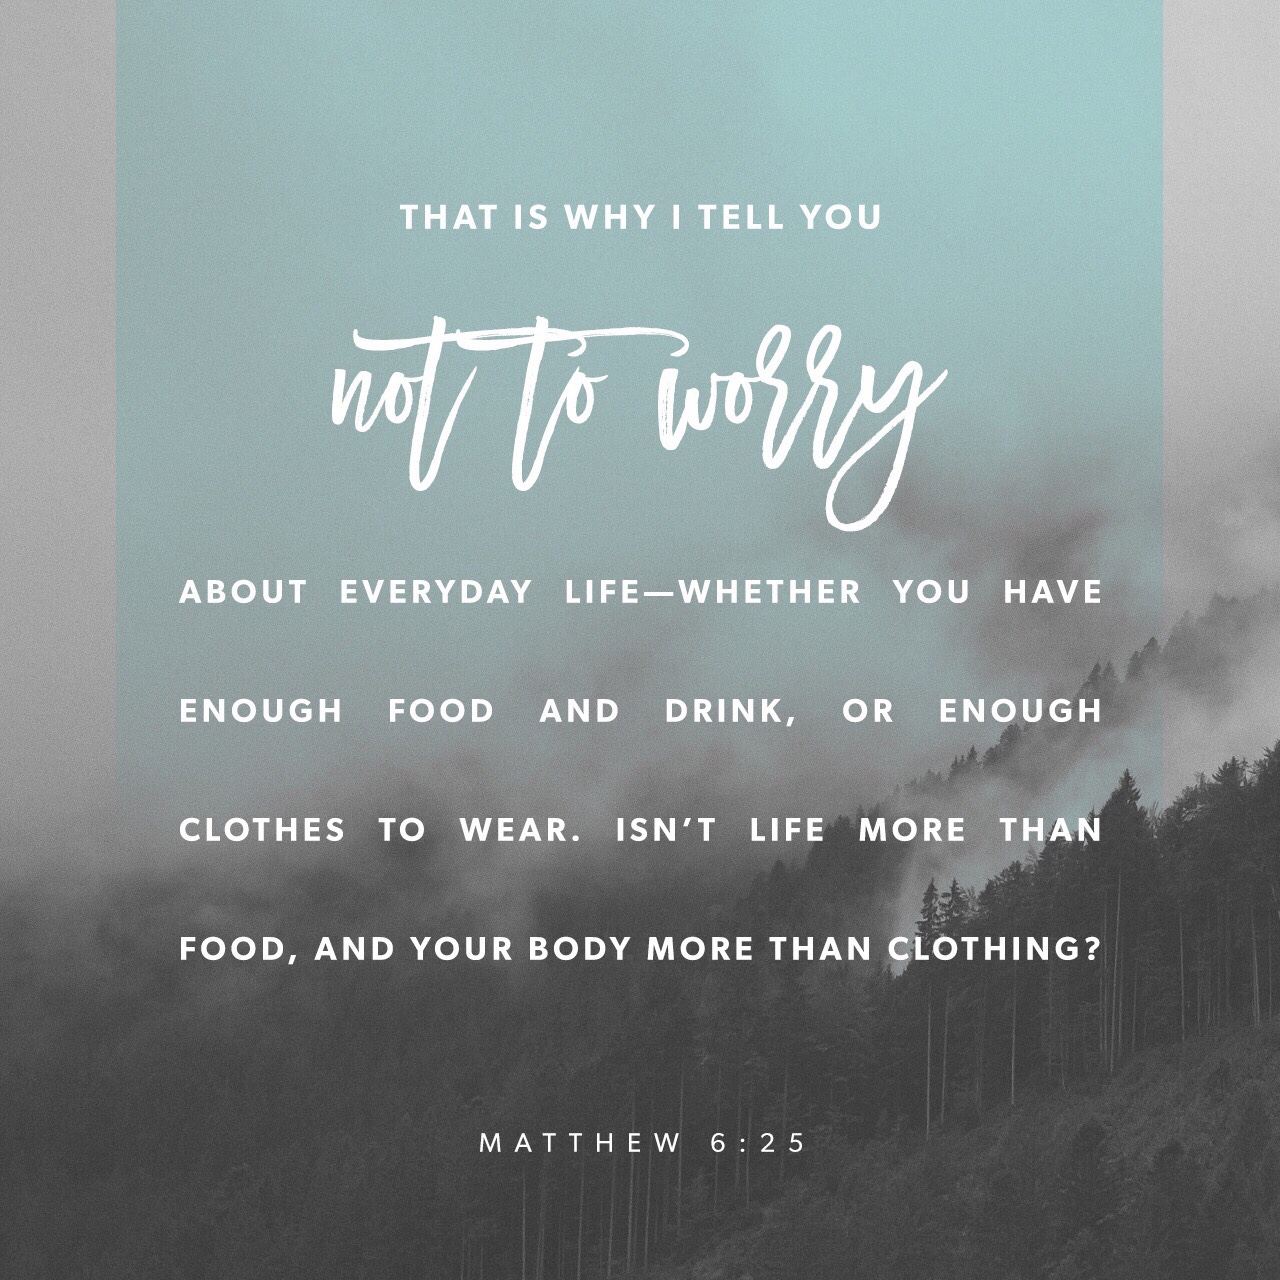 VOTD July 6, 2019 - For this reason I say to you, do not be worried about your life, as to what you will eat or what you will drink; nor for your body, as to what you will put on. Is not life more than food, and the body more than clothing? MATTHEW‬ ‭6:25‬ ‭NASB‬‬